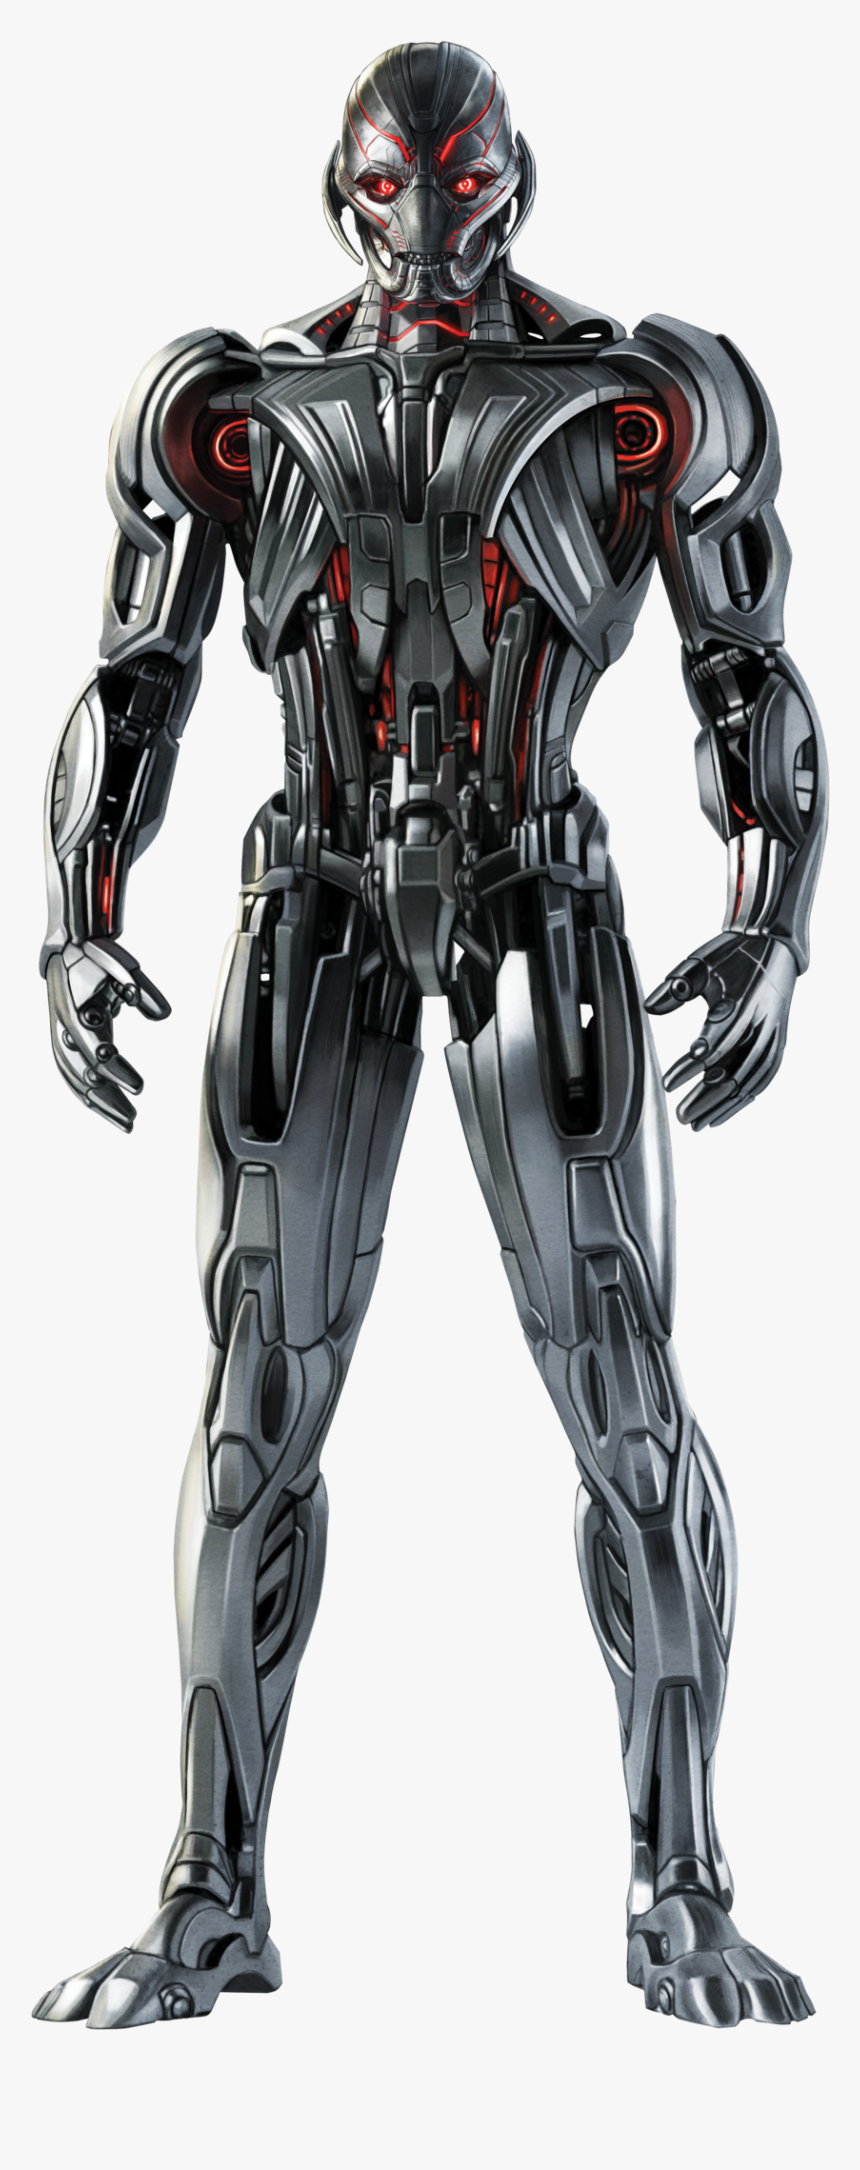 Ultron Png Image - Ultron Avengers Full Body, Transparent Png, Free Download